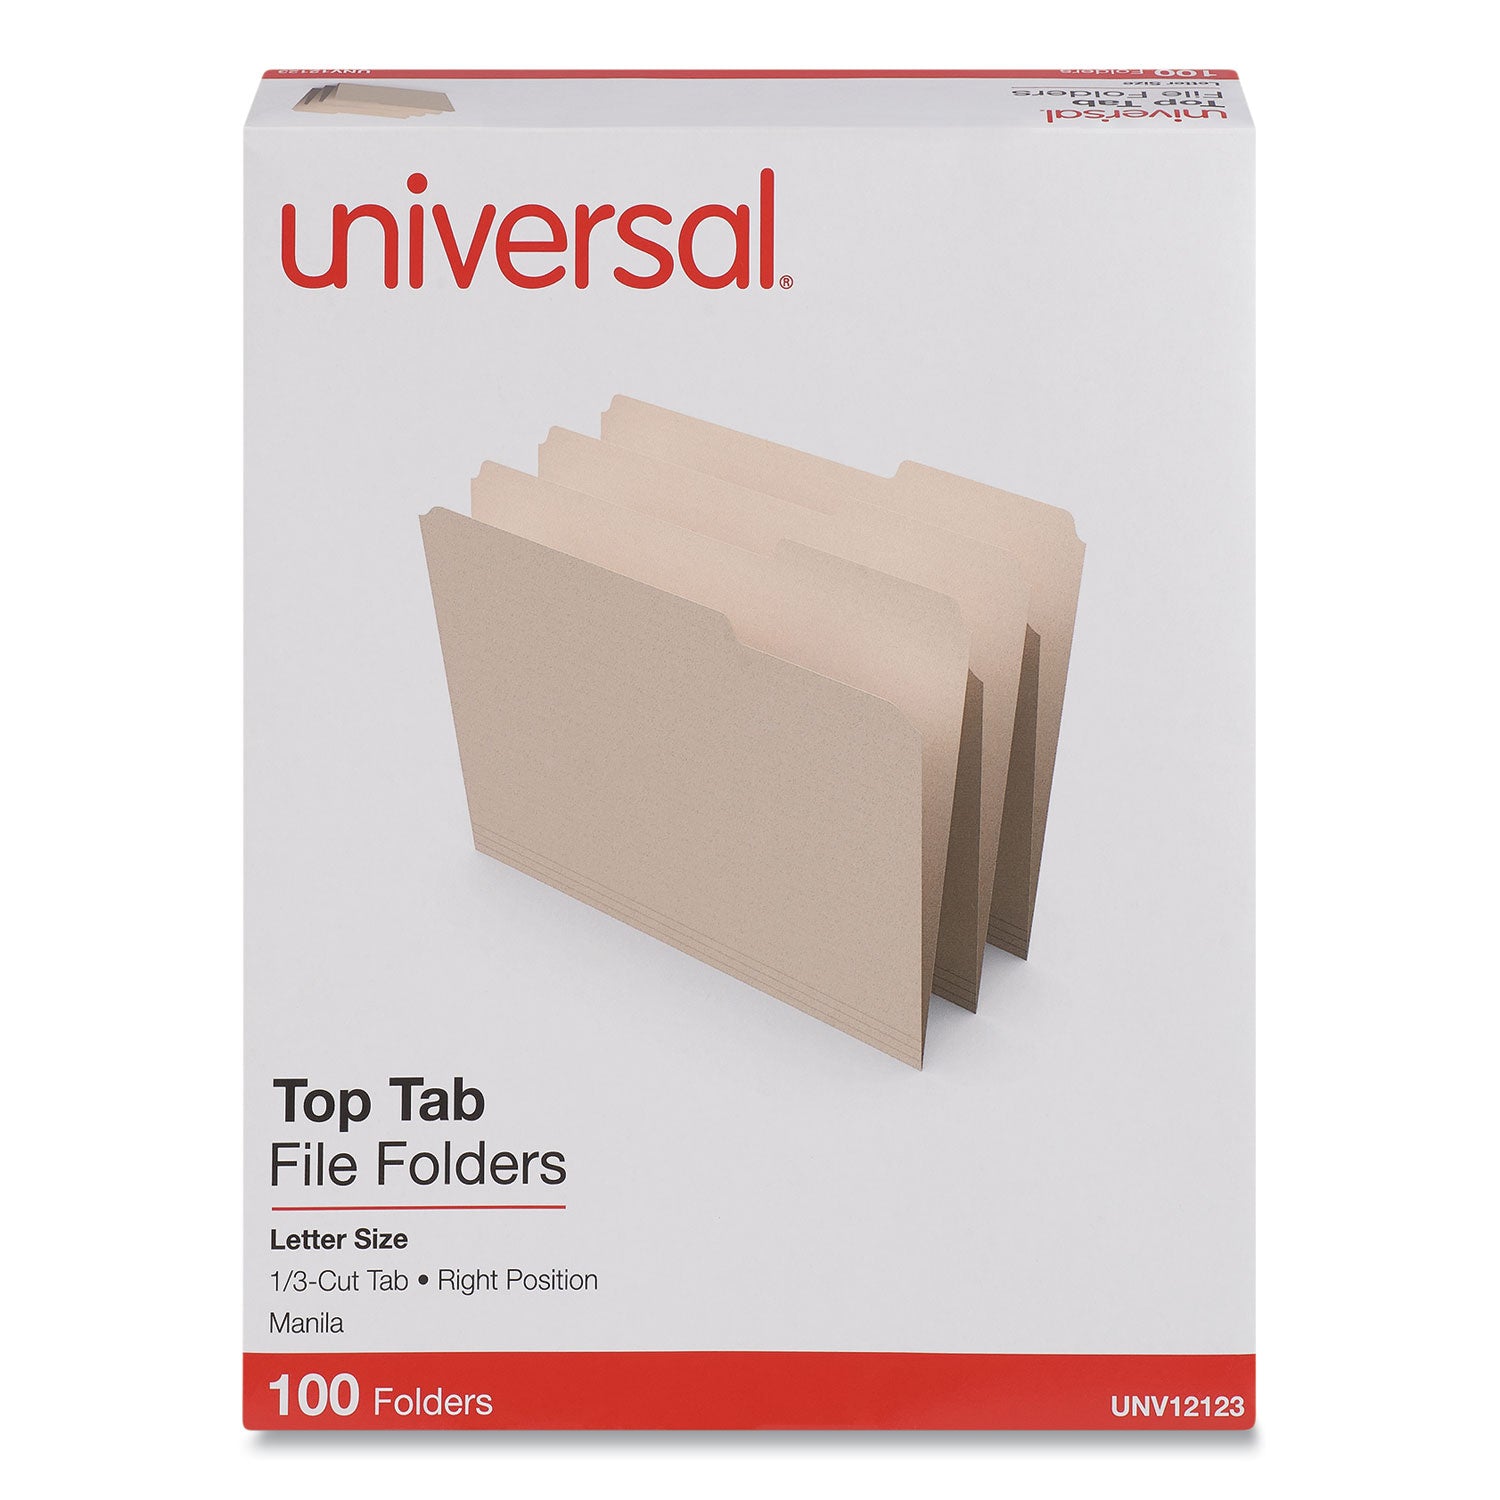 Top Tab File Folders, 1/3-Cut Tabs: Right Position, Letter Size, 0.75" Expansion, Manila, 100/Box - 